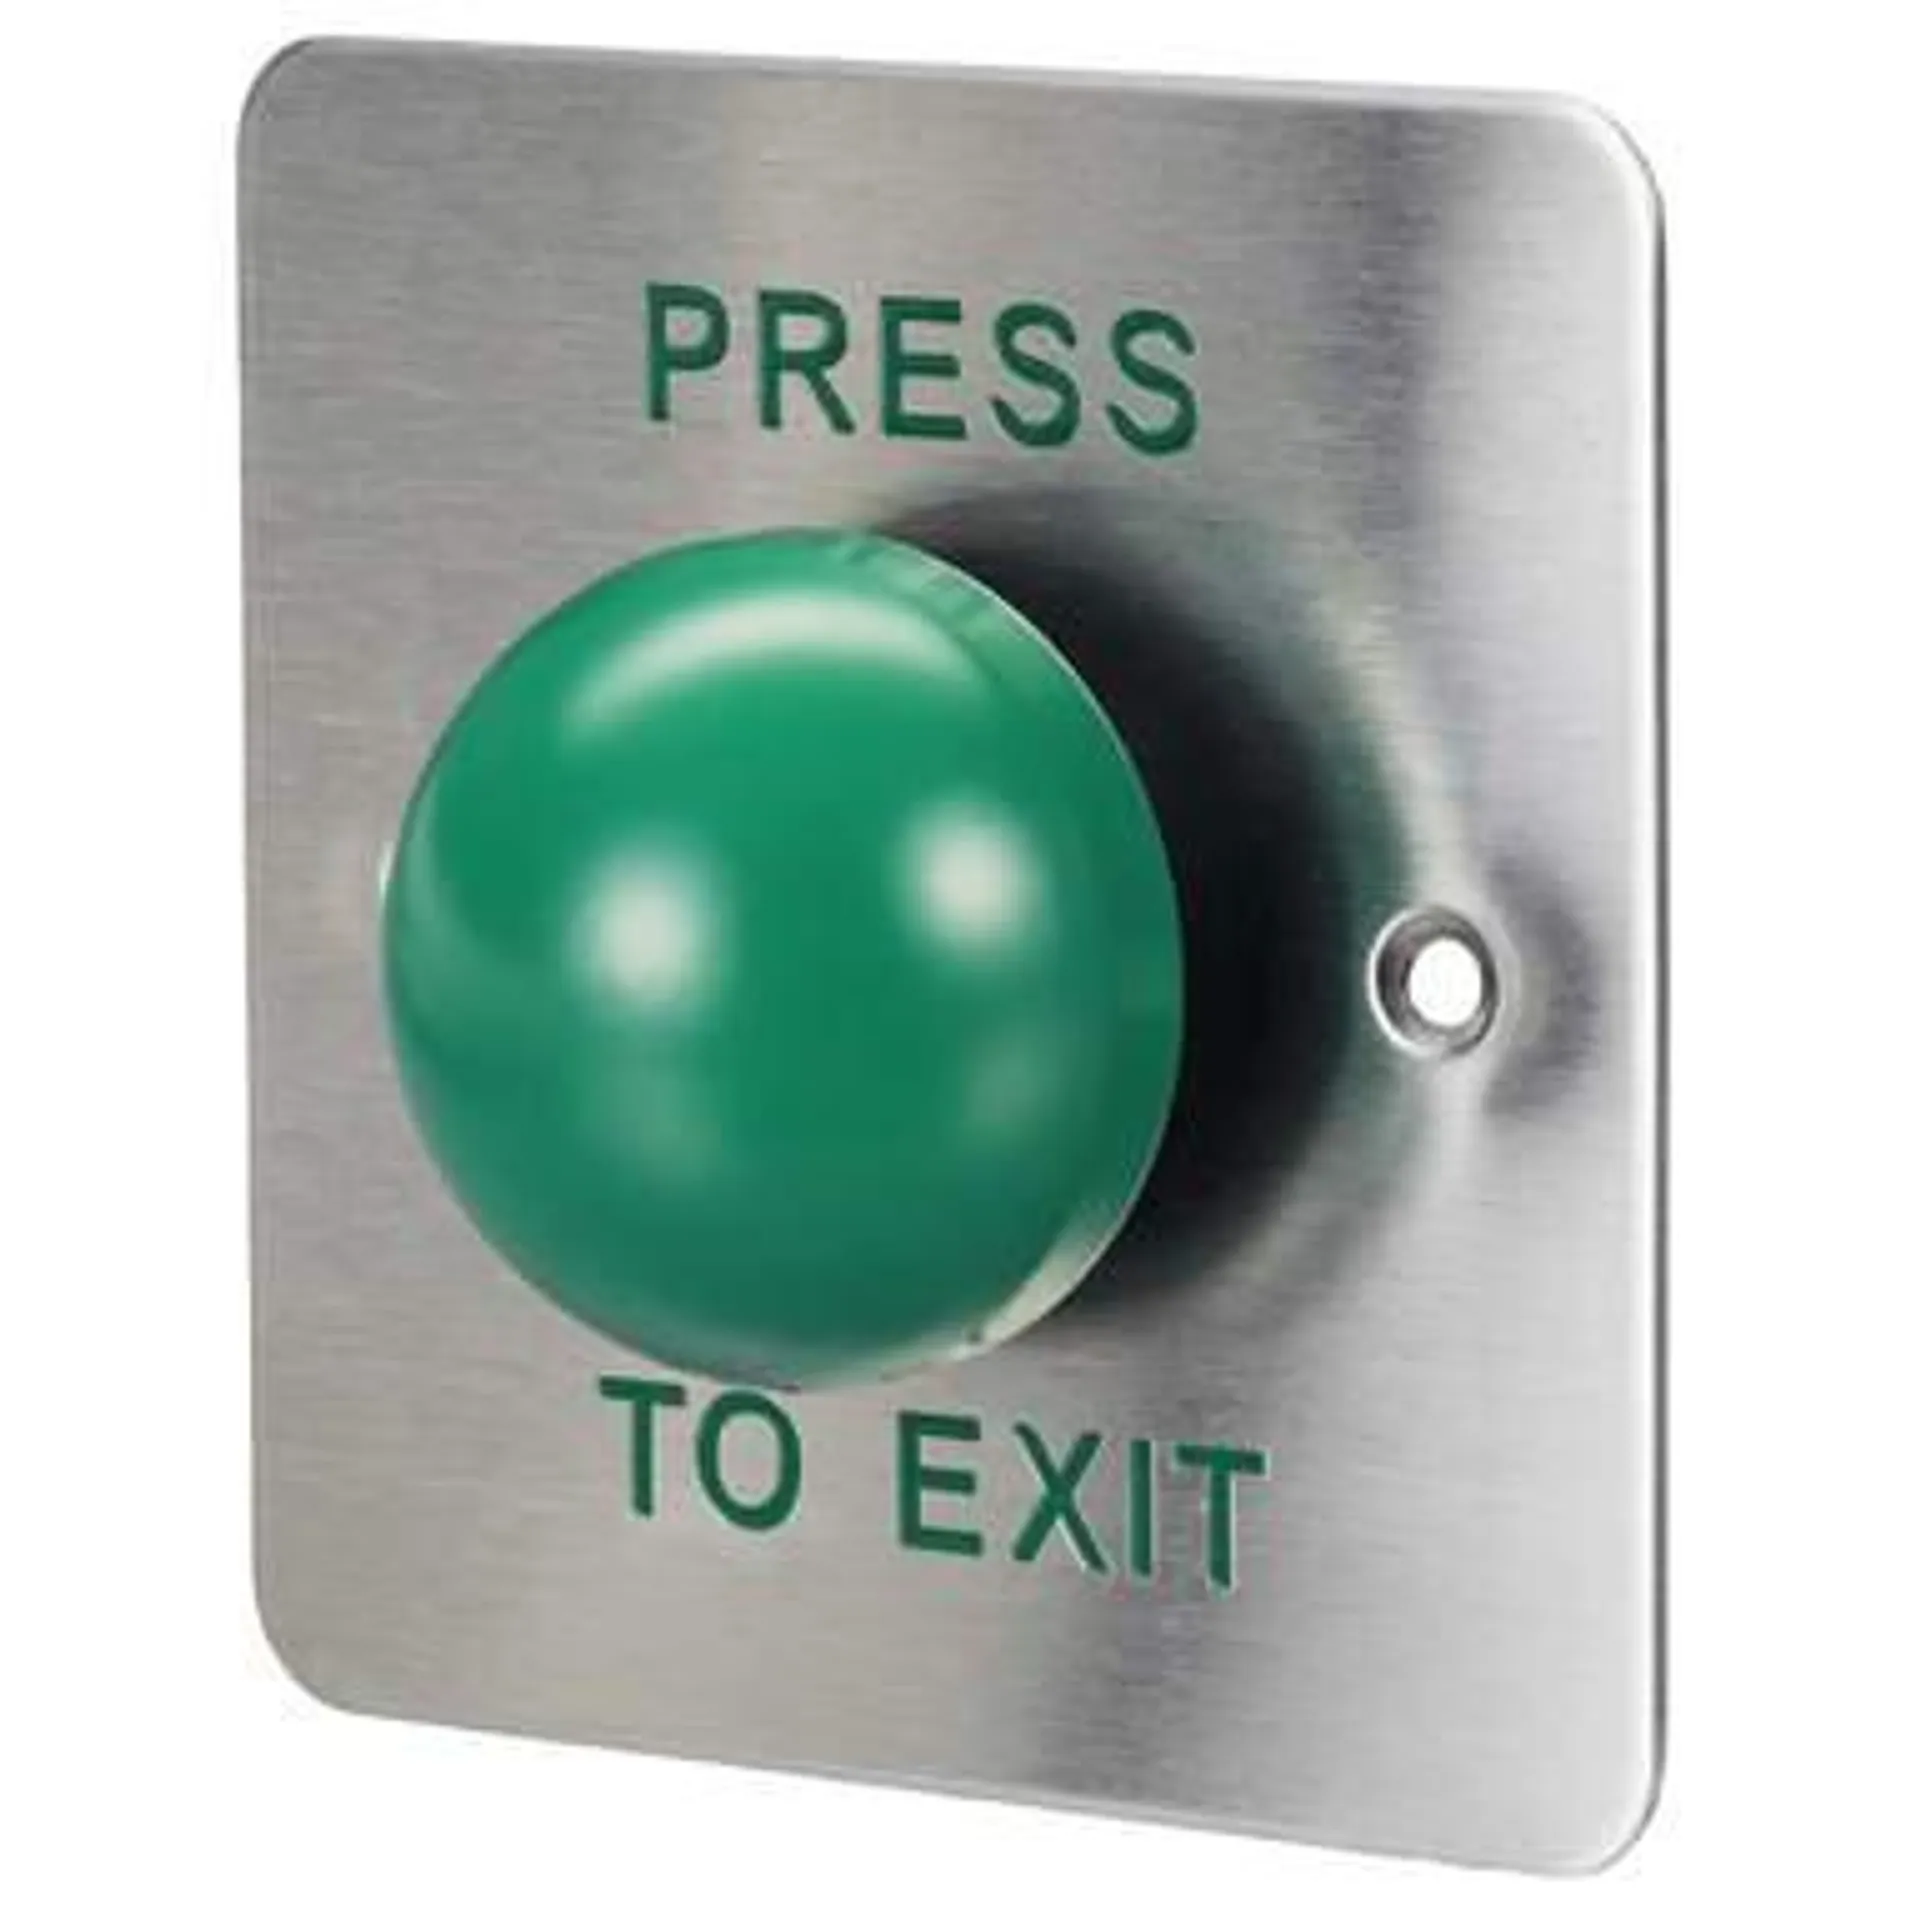 ESP Push to Exit Mushroom Release Button Stainless Steel